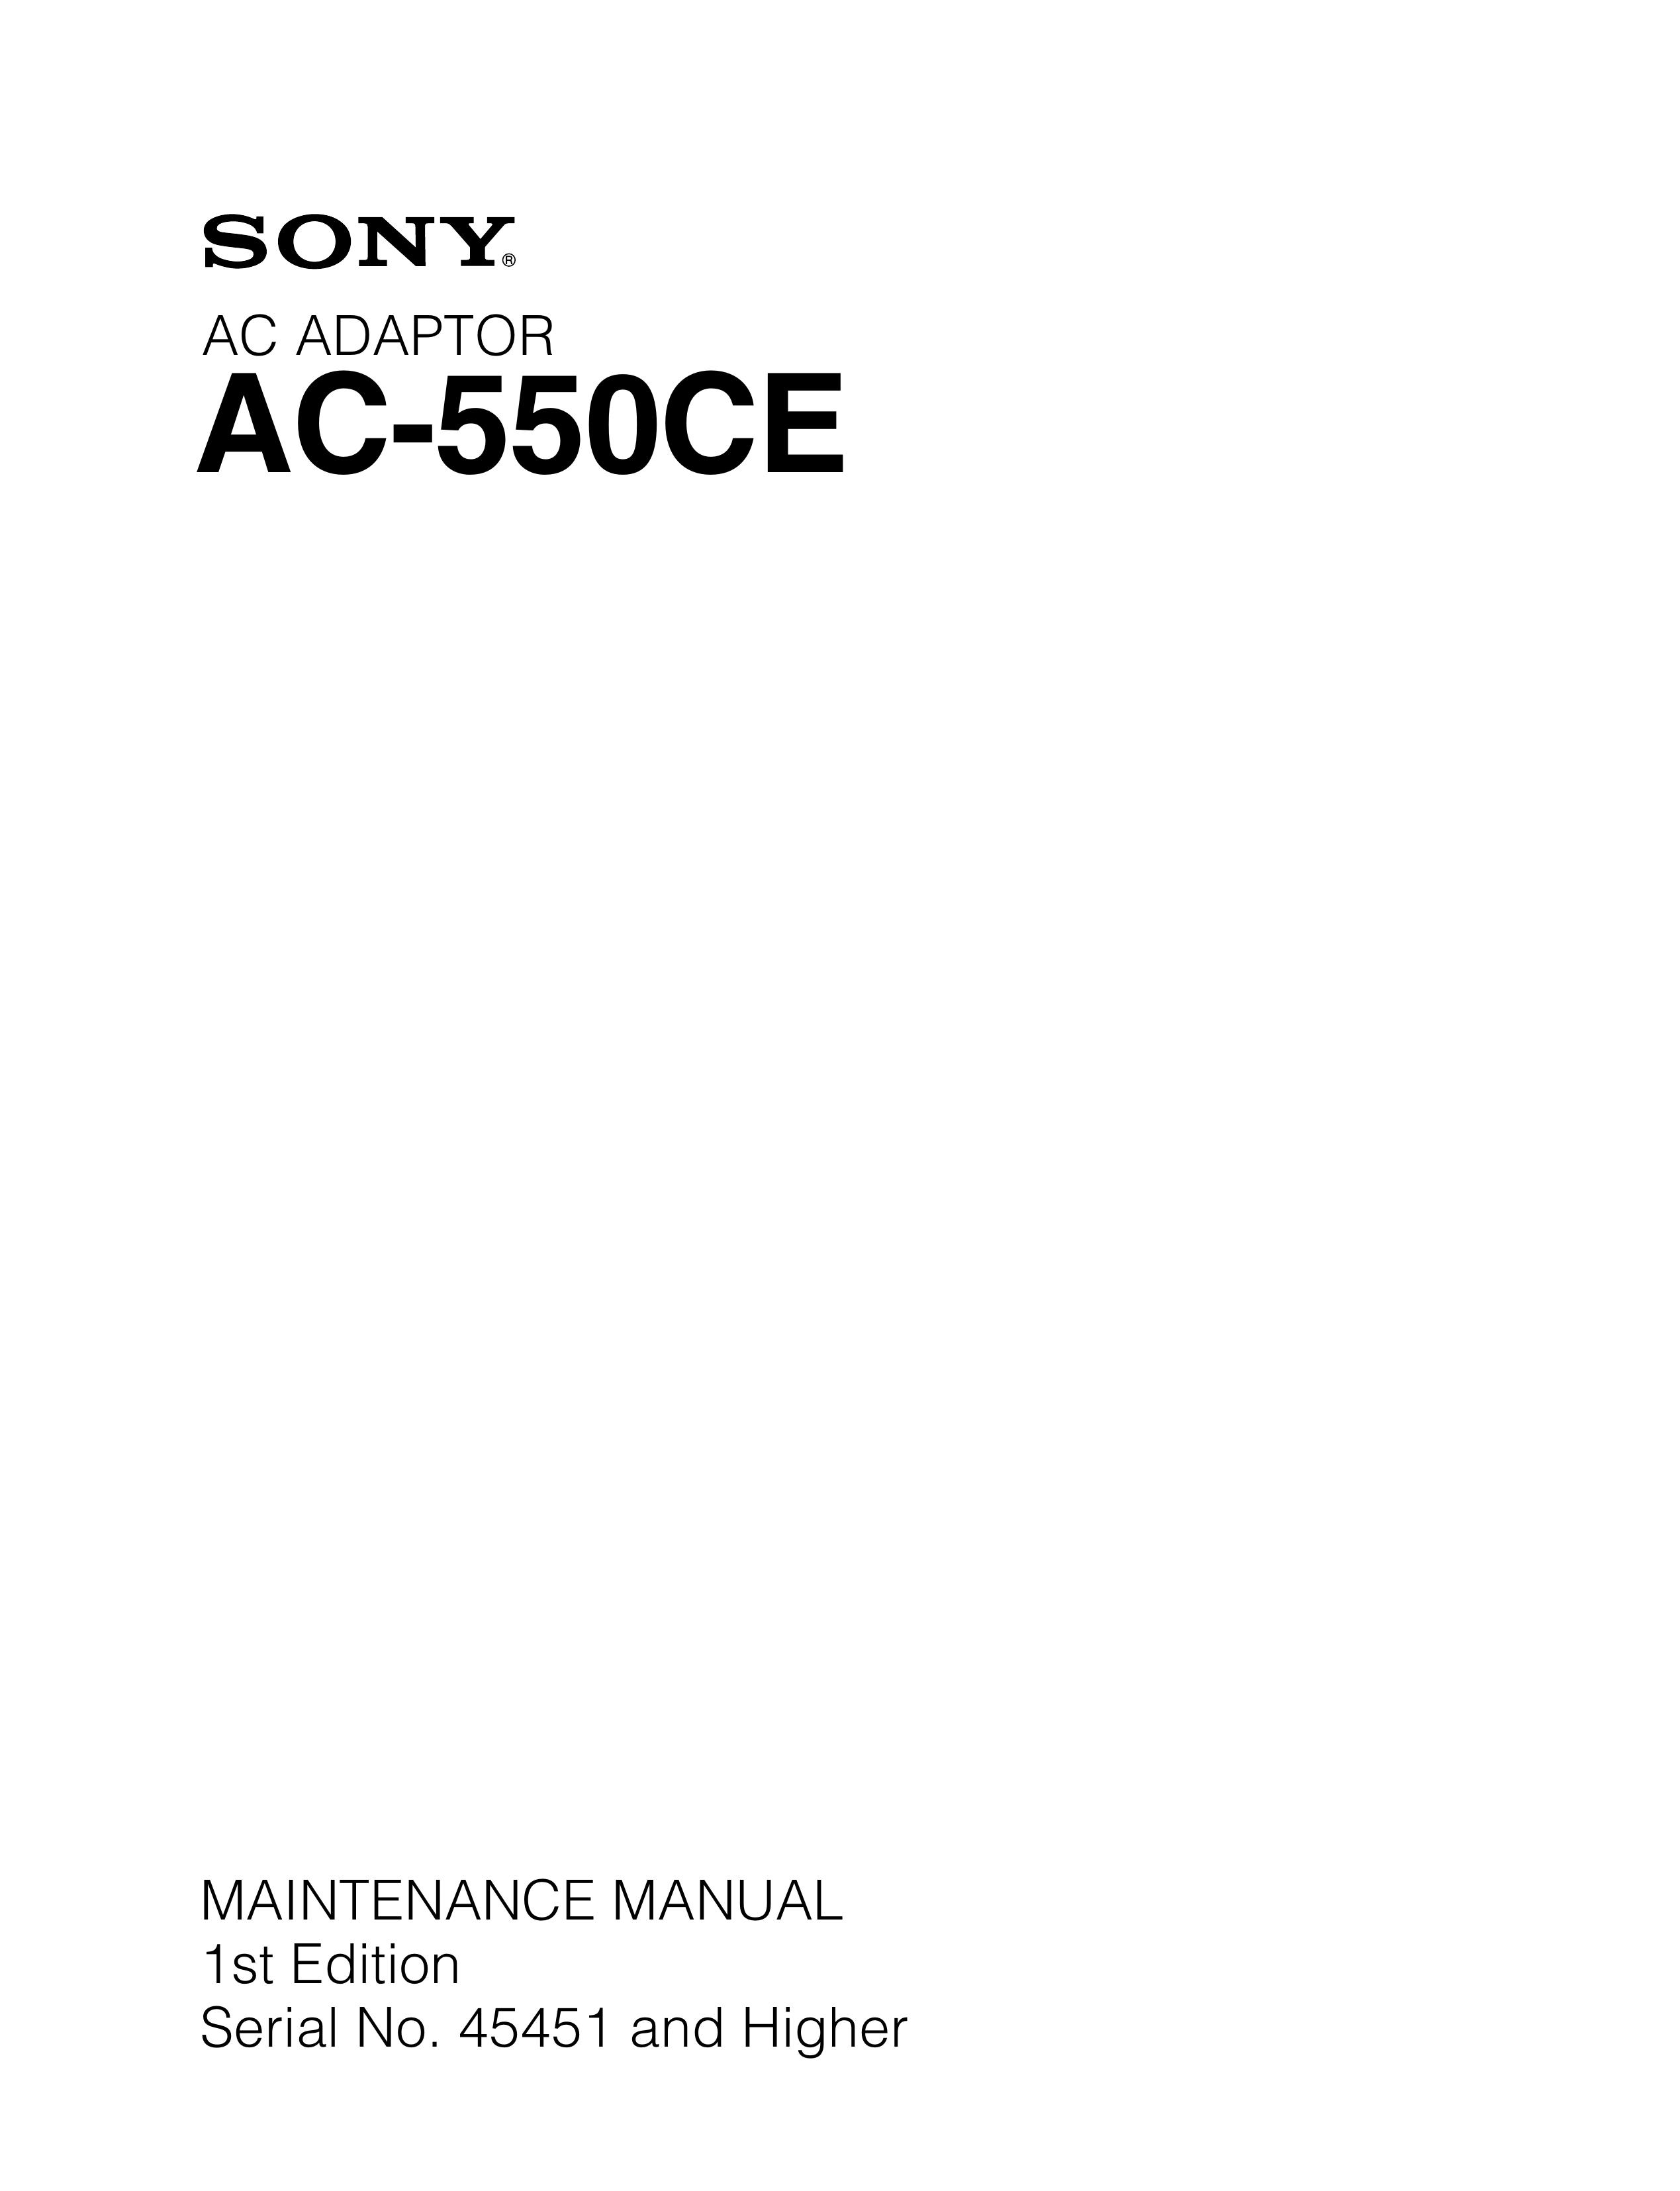 Sony AC-550CE Pacemaker User Manual